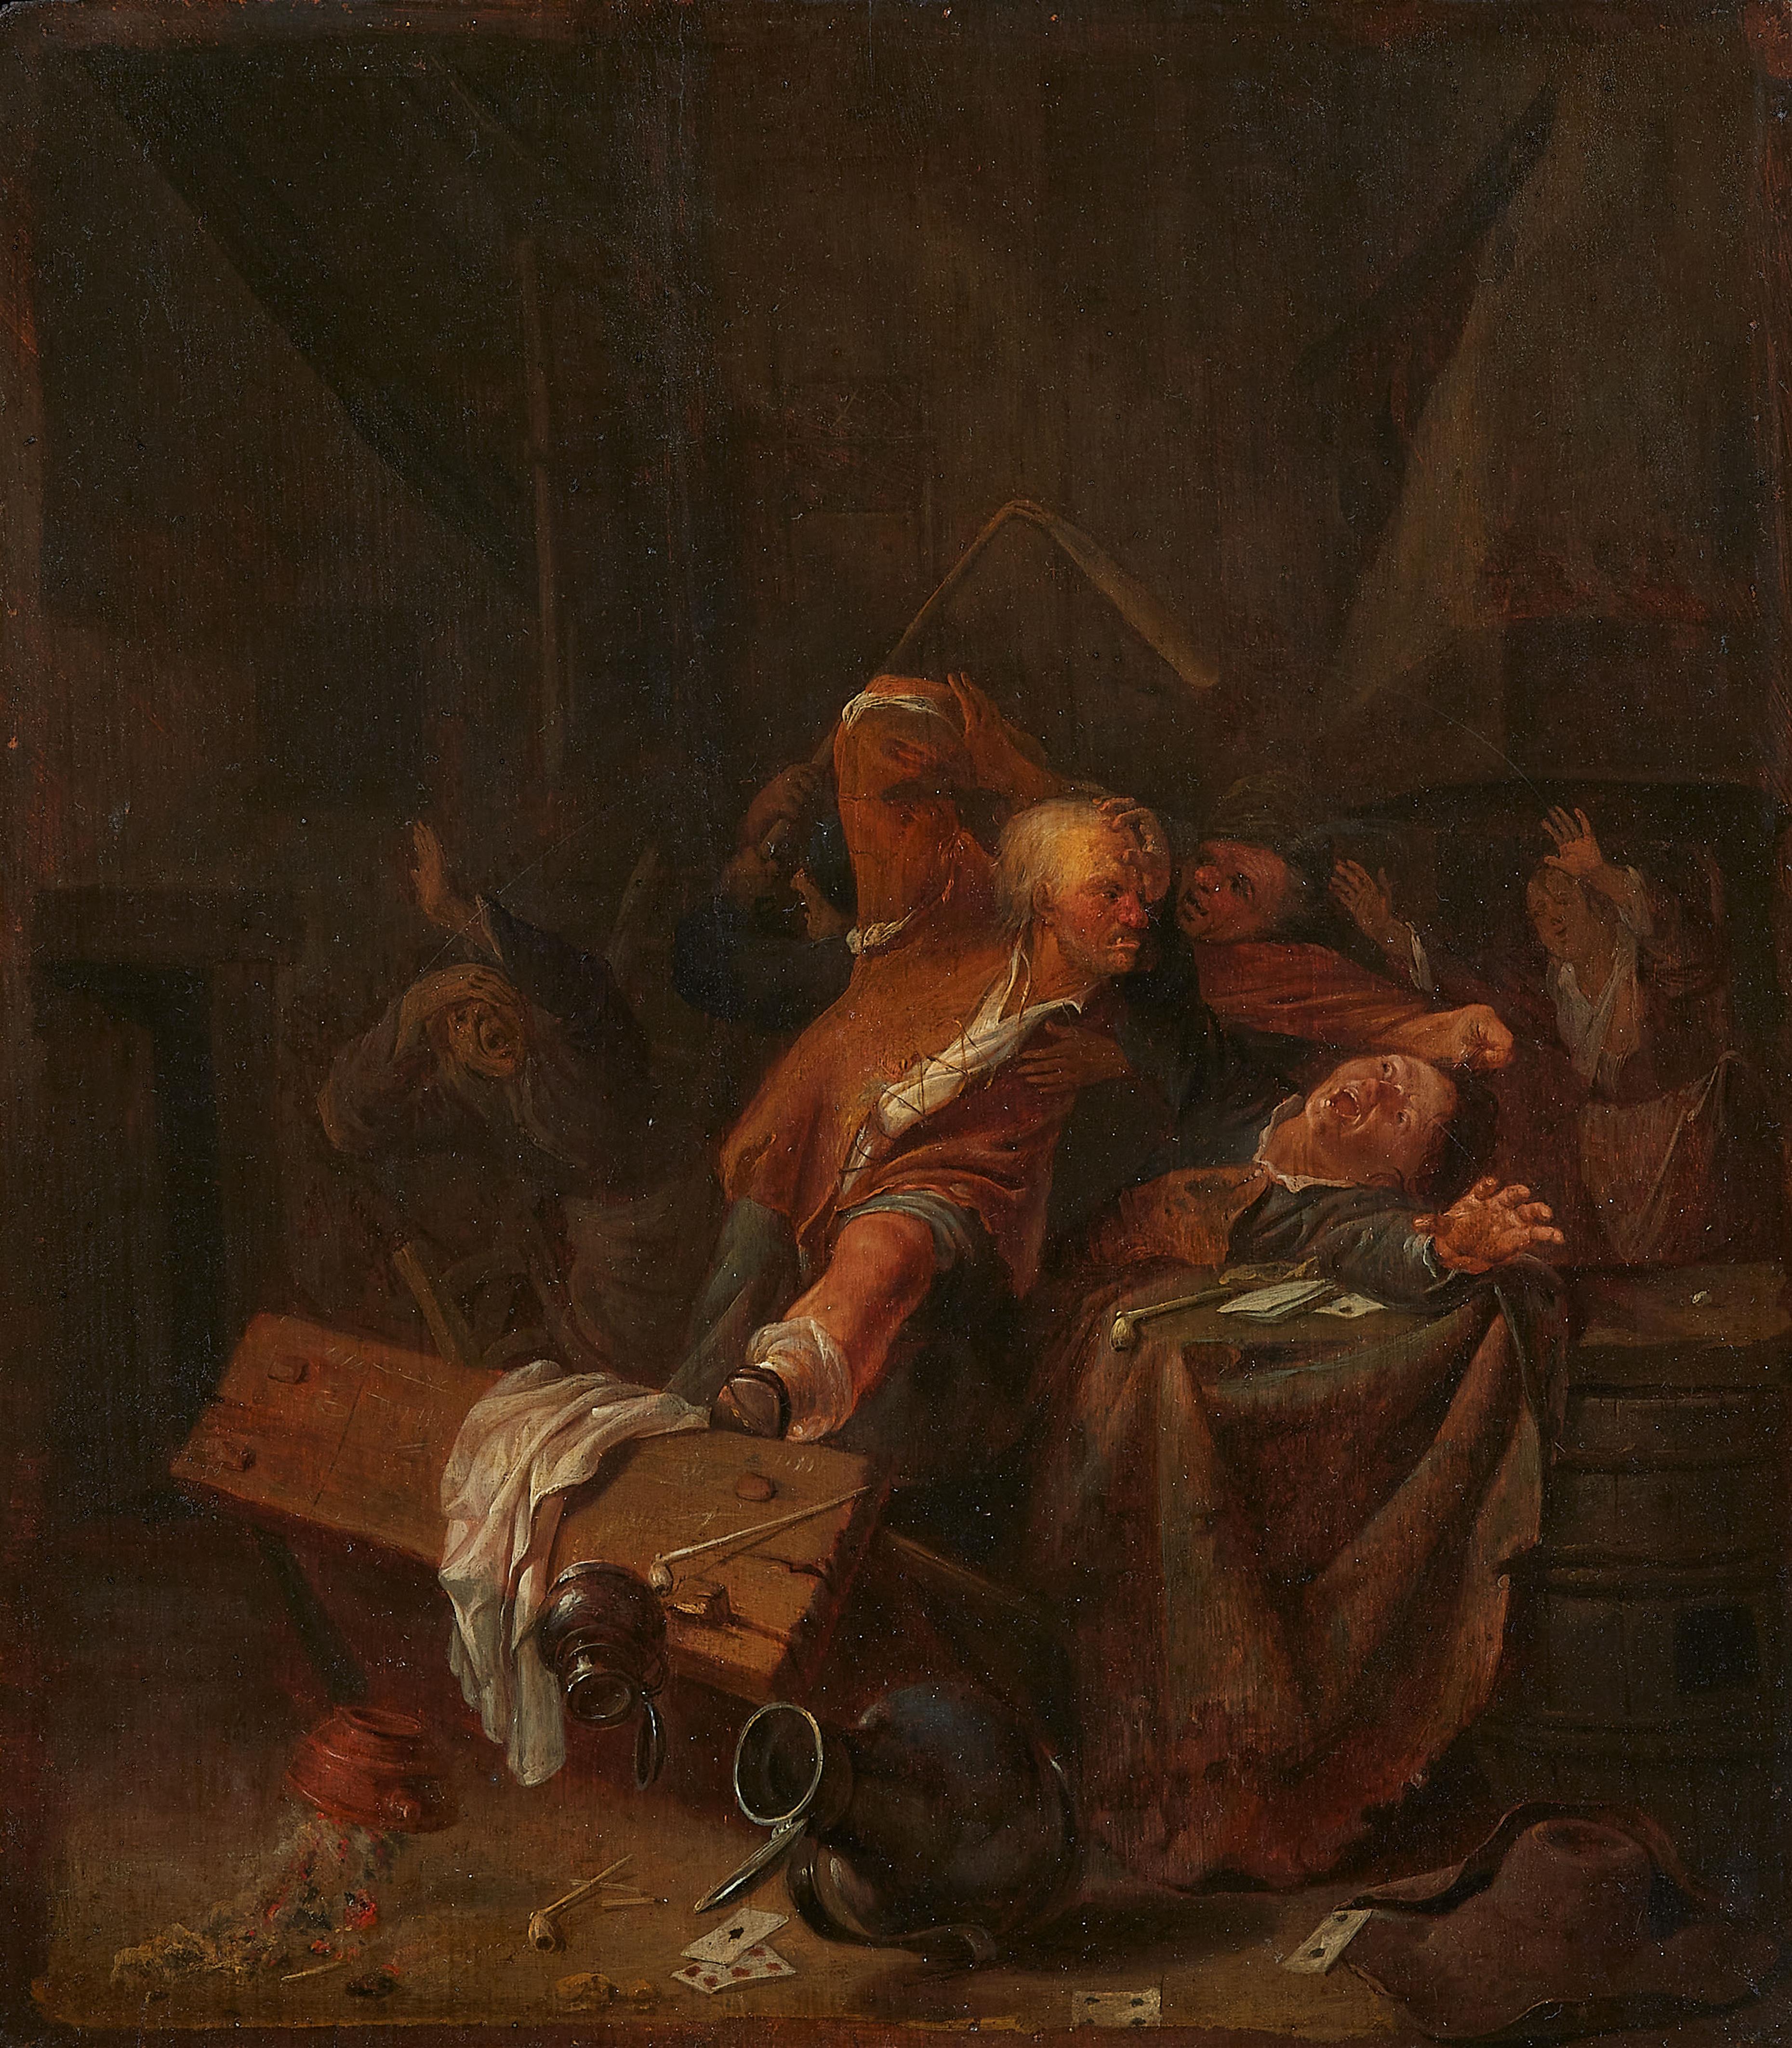 Adriaen Brouwer, attributed to - Fight in a Tavern - image-1